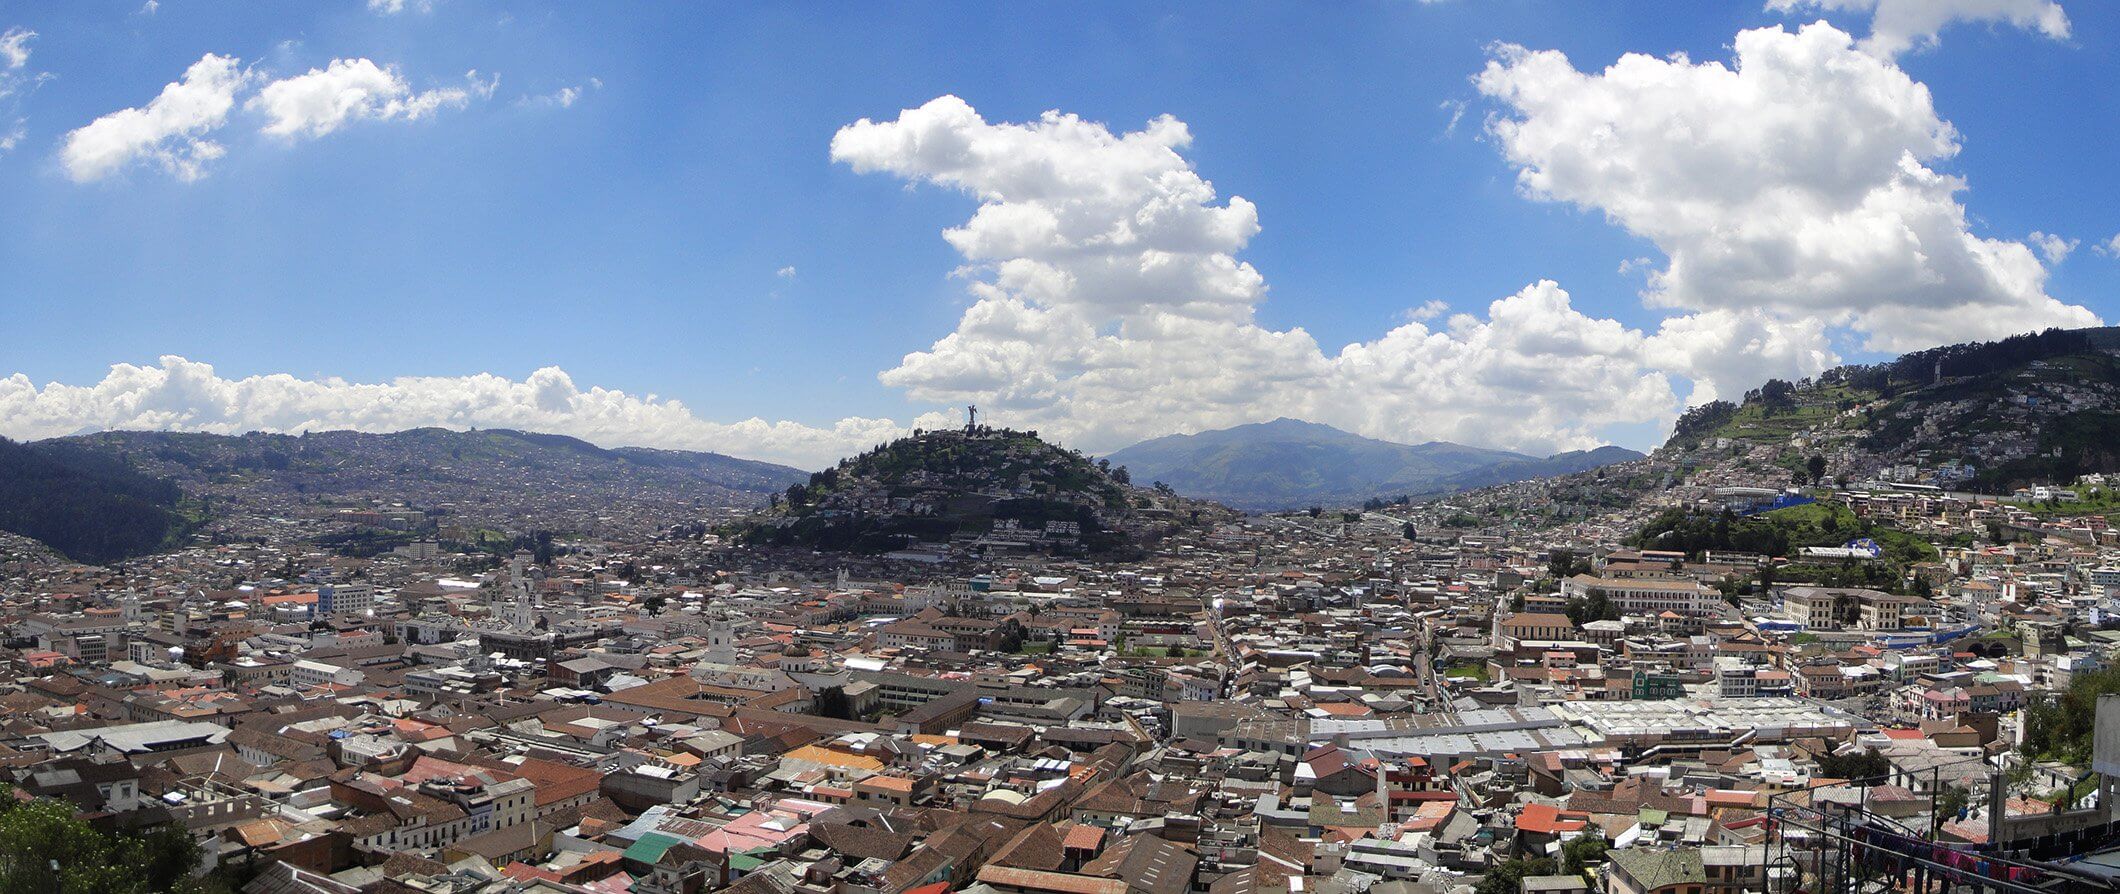 View from above looking down over Quito in Ecuador